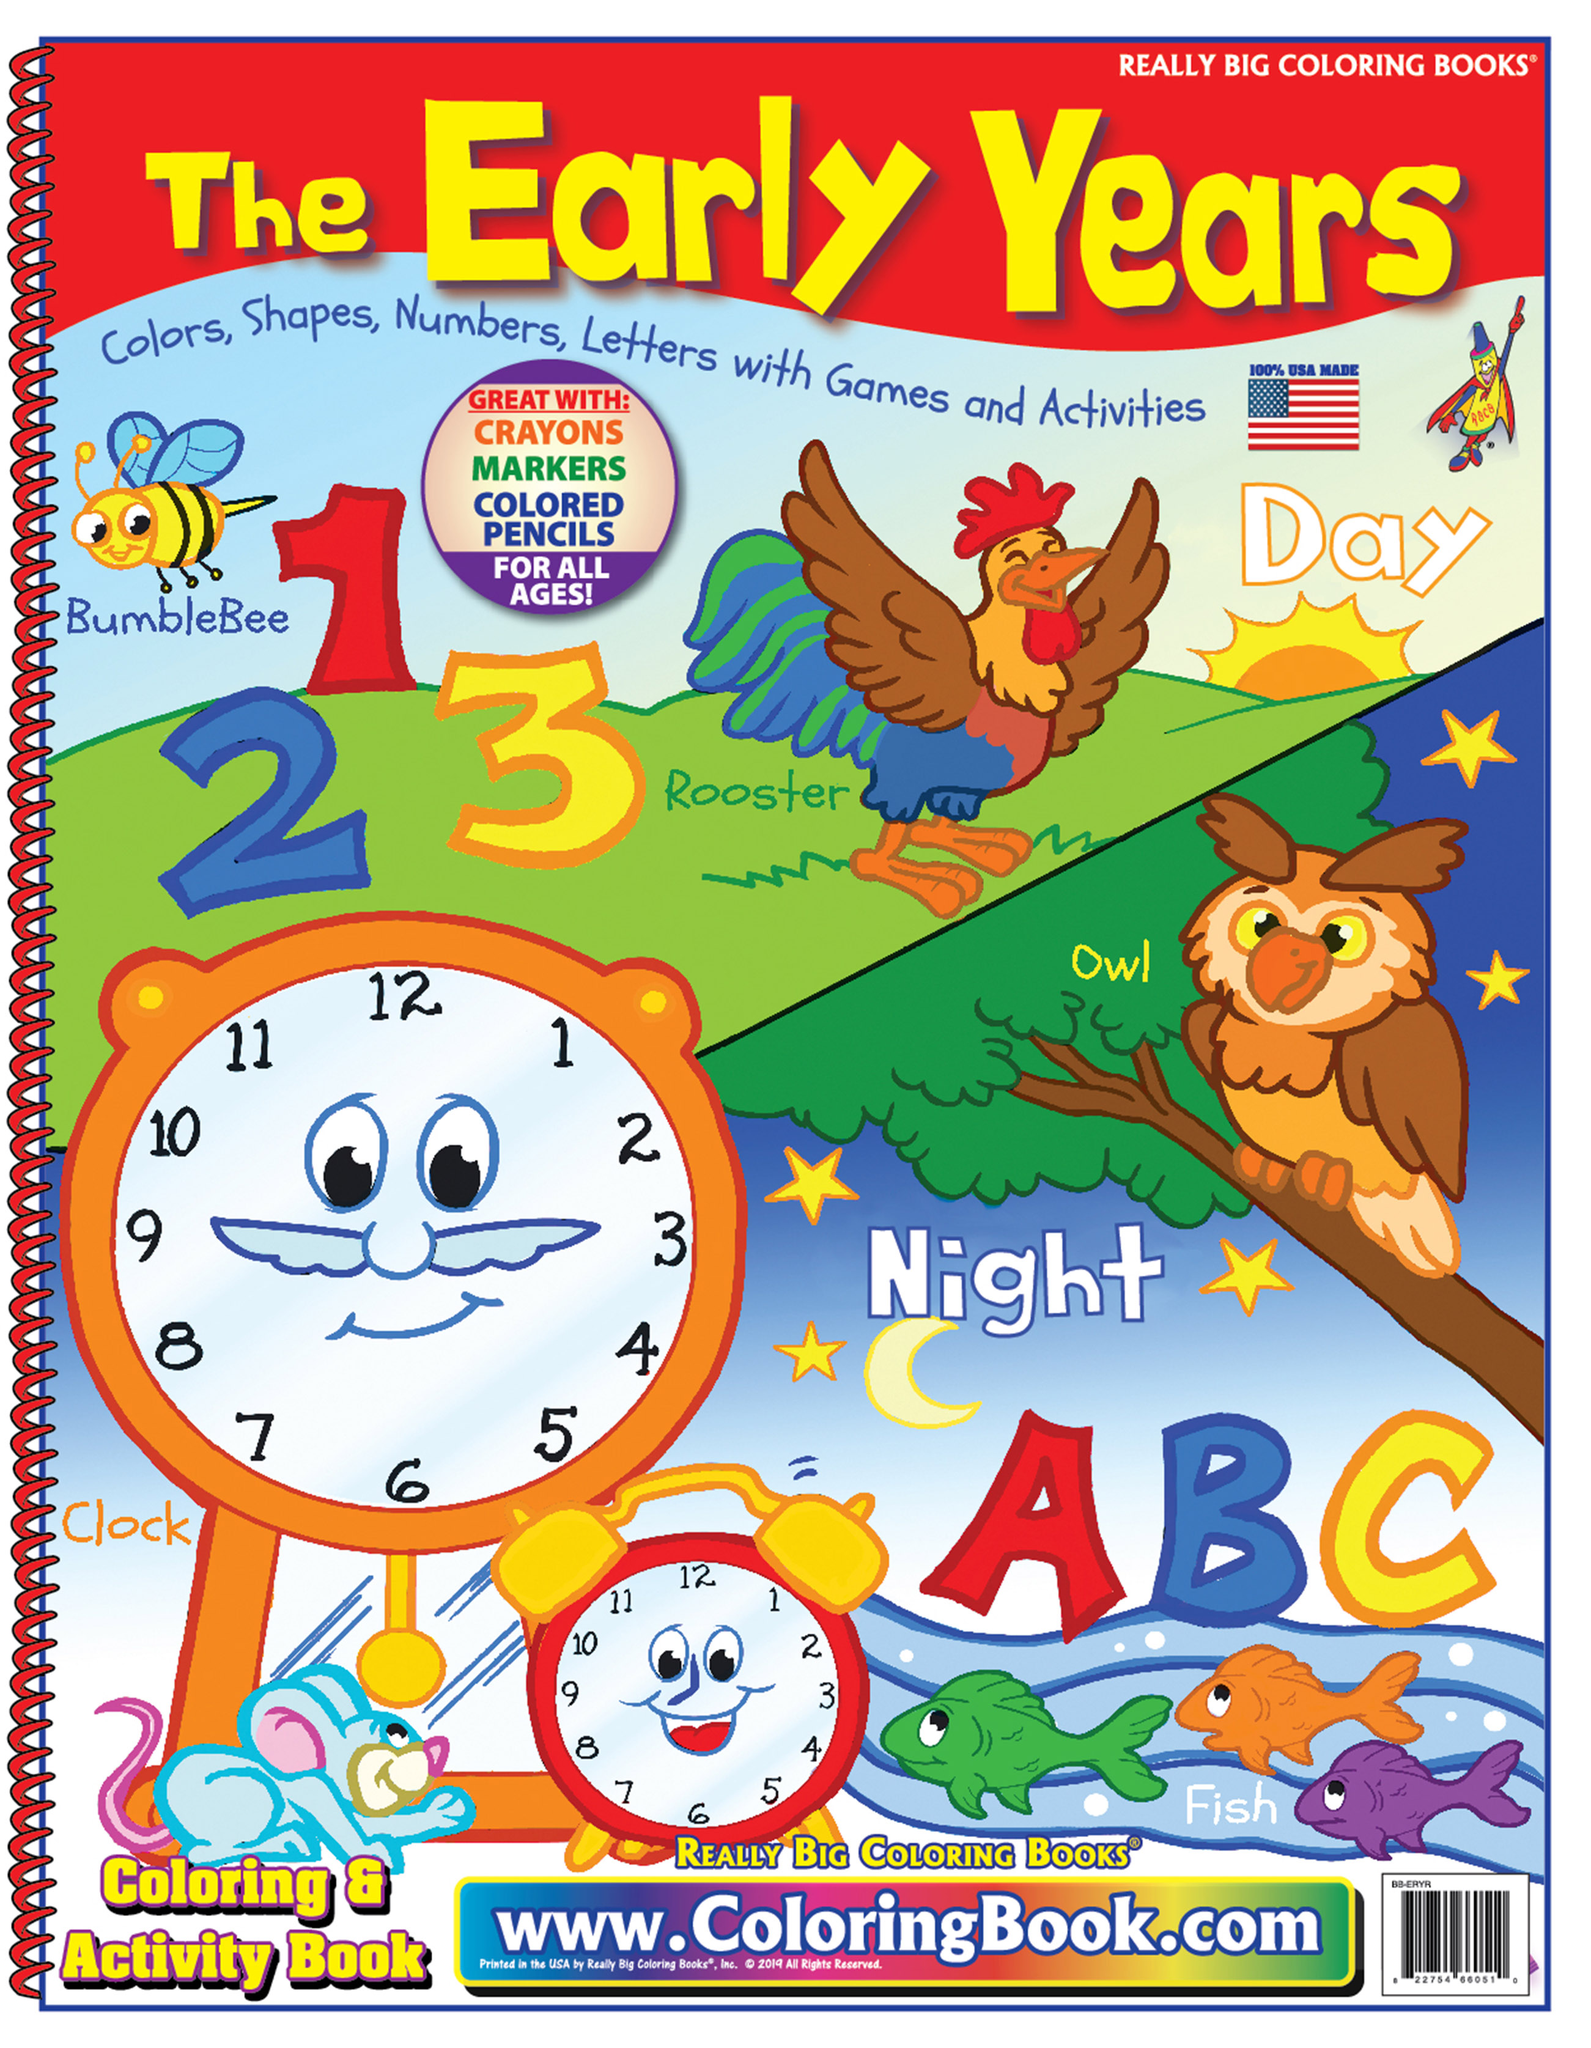 Really Big Coloring Books 17x22 Early Years